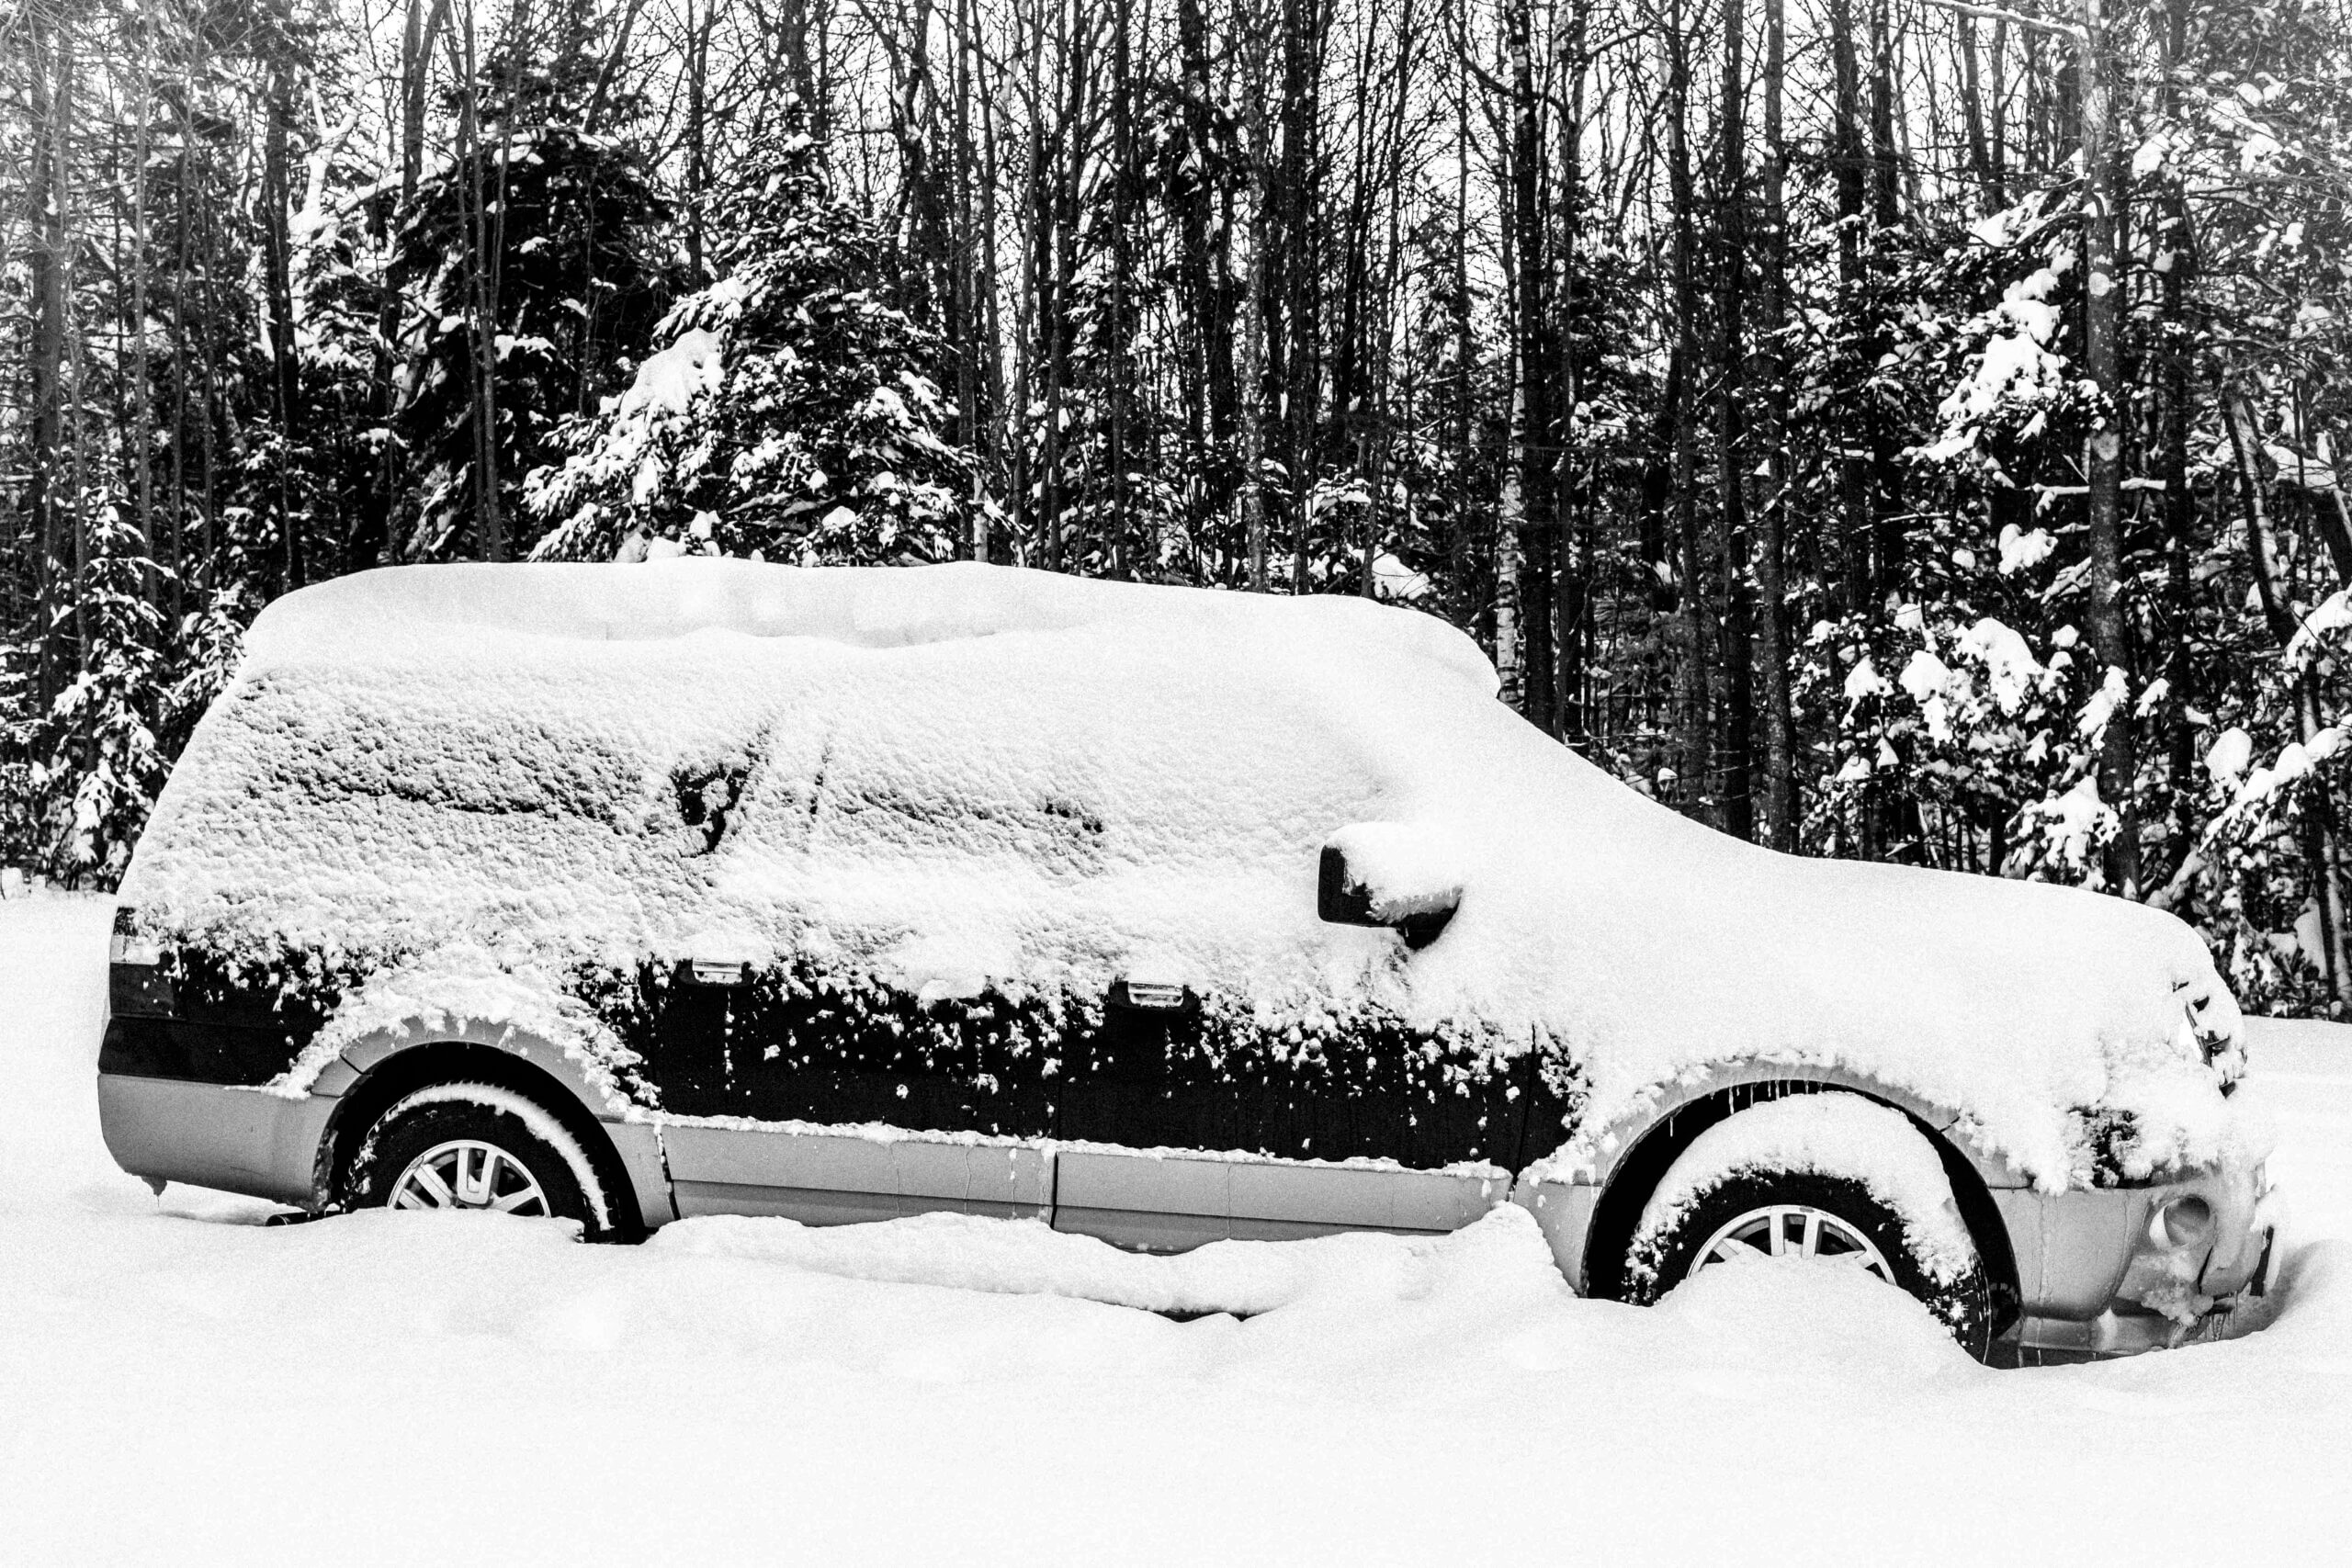 A snow covered SUV.